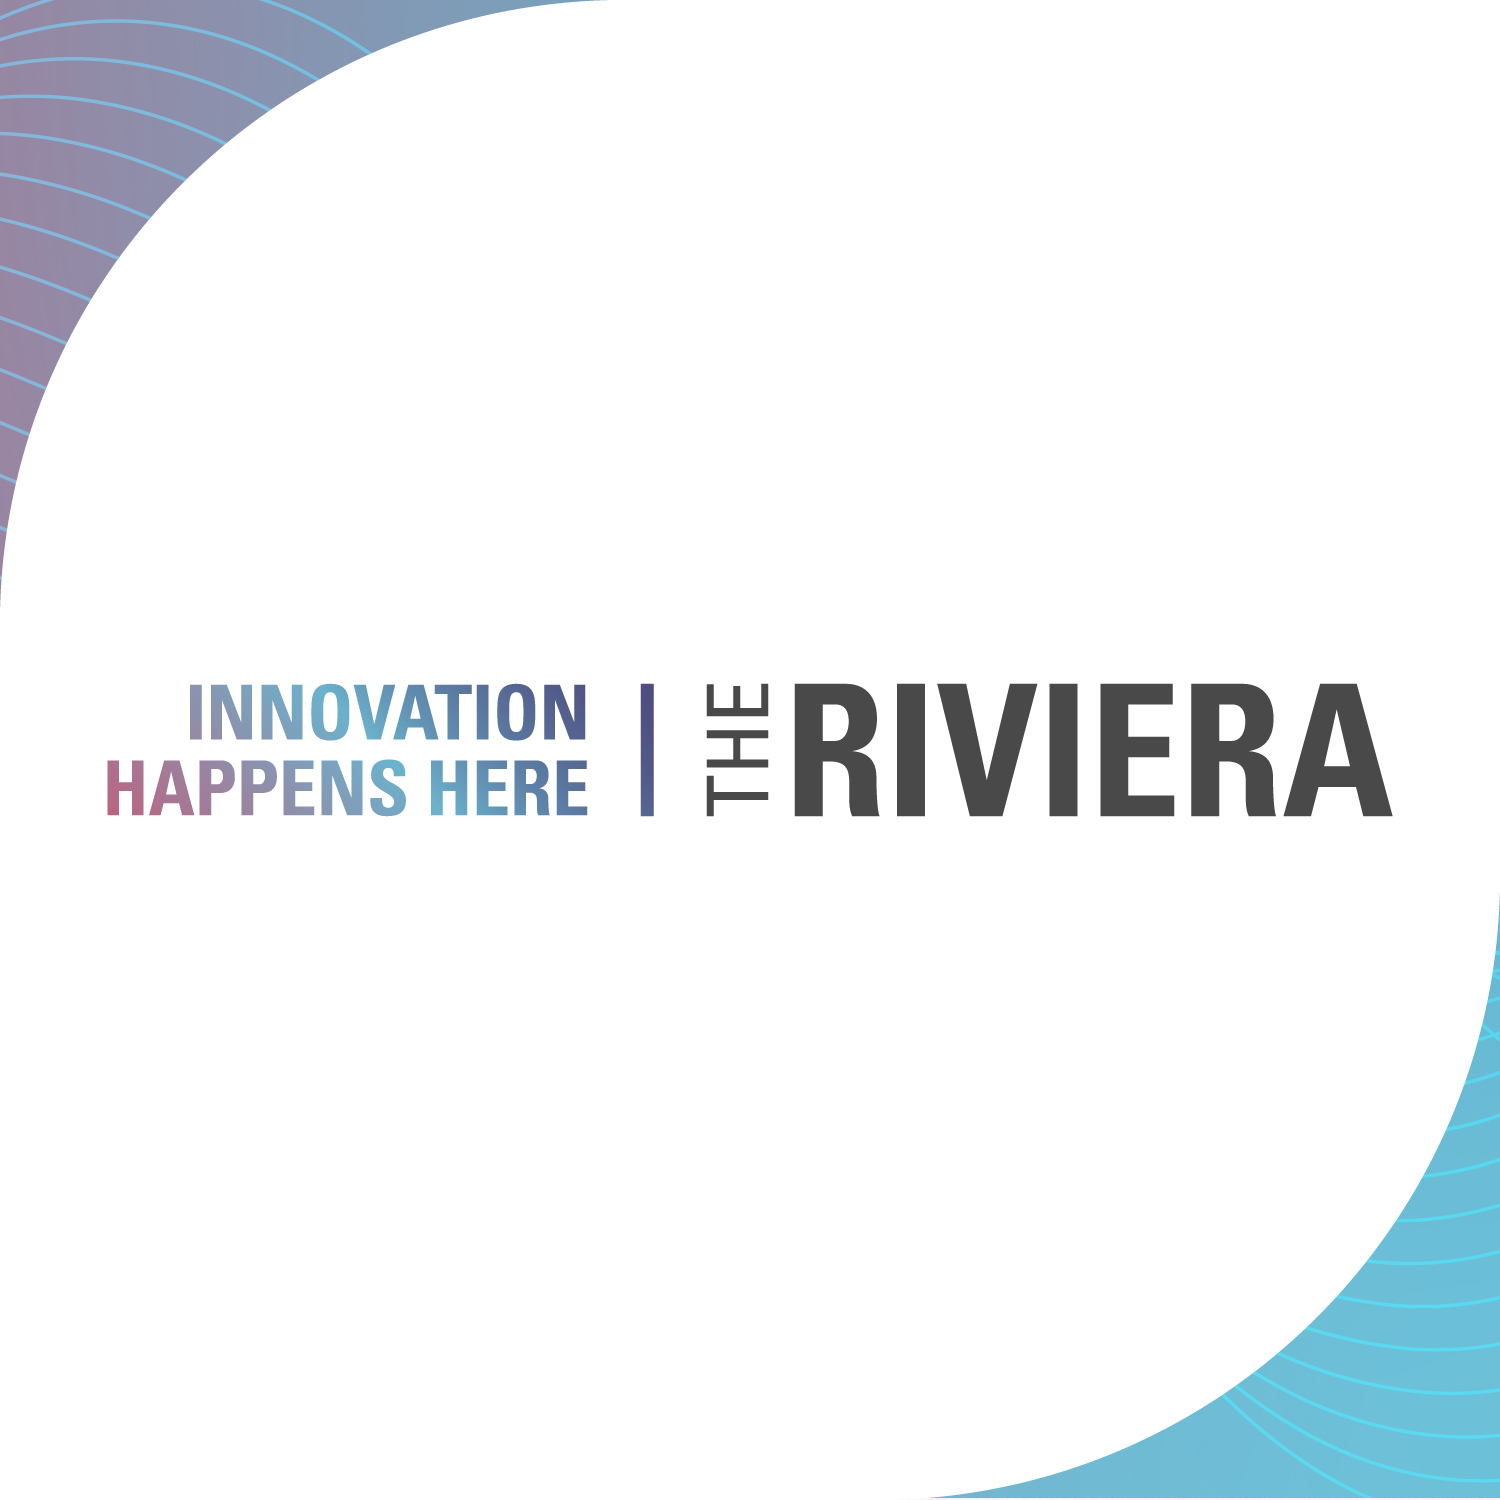 The Riviera logo and tagline: Innovation Happens Here